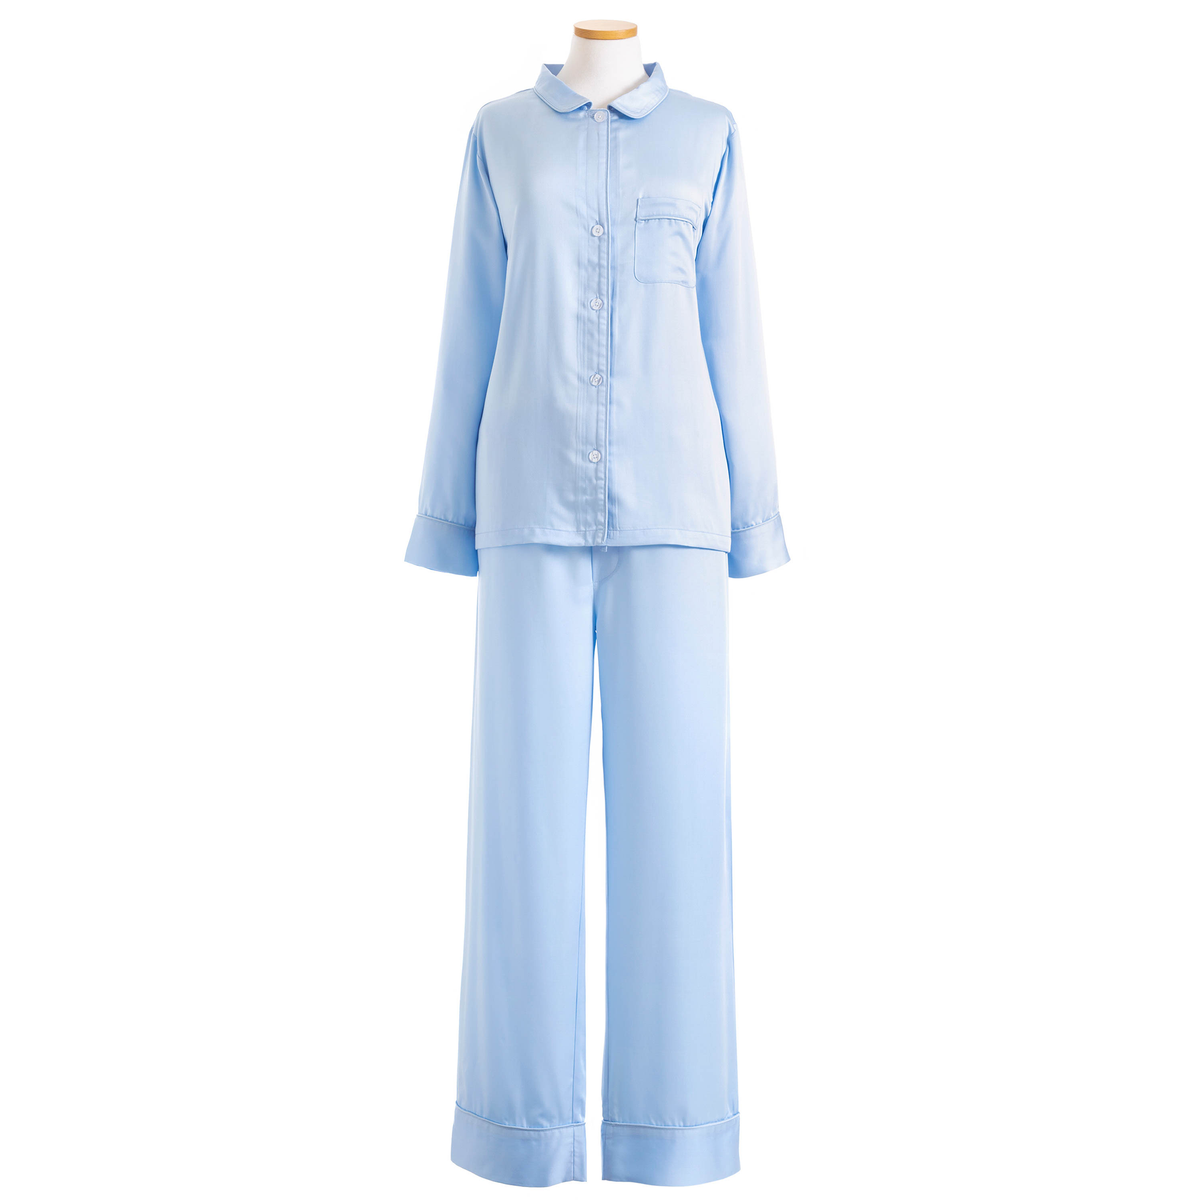 Mannequin wearing a Pine Cone Hill Silken Solid Pajama in Soft Blue Color